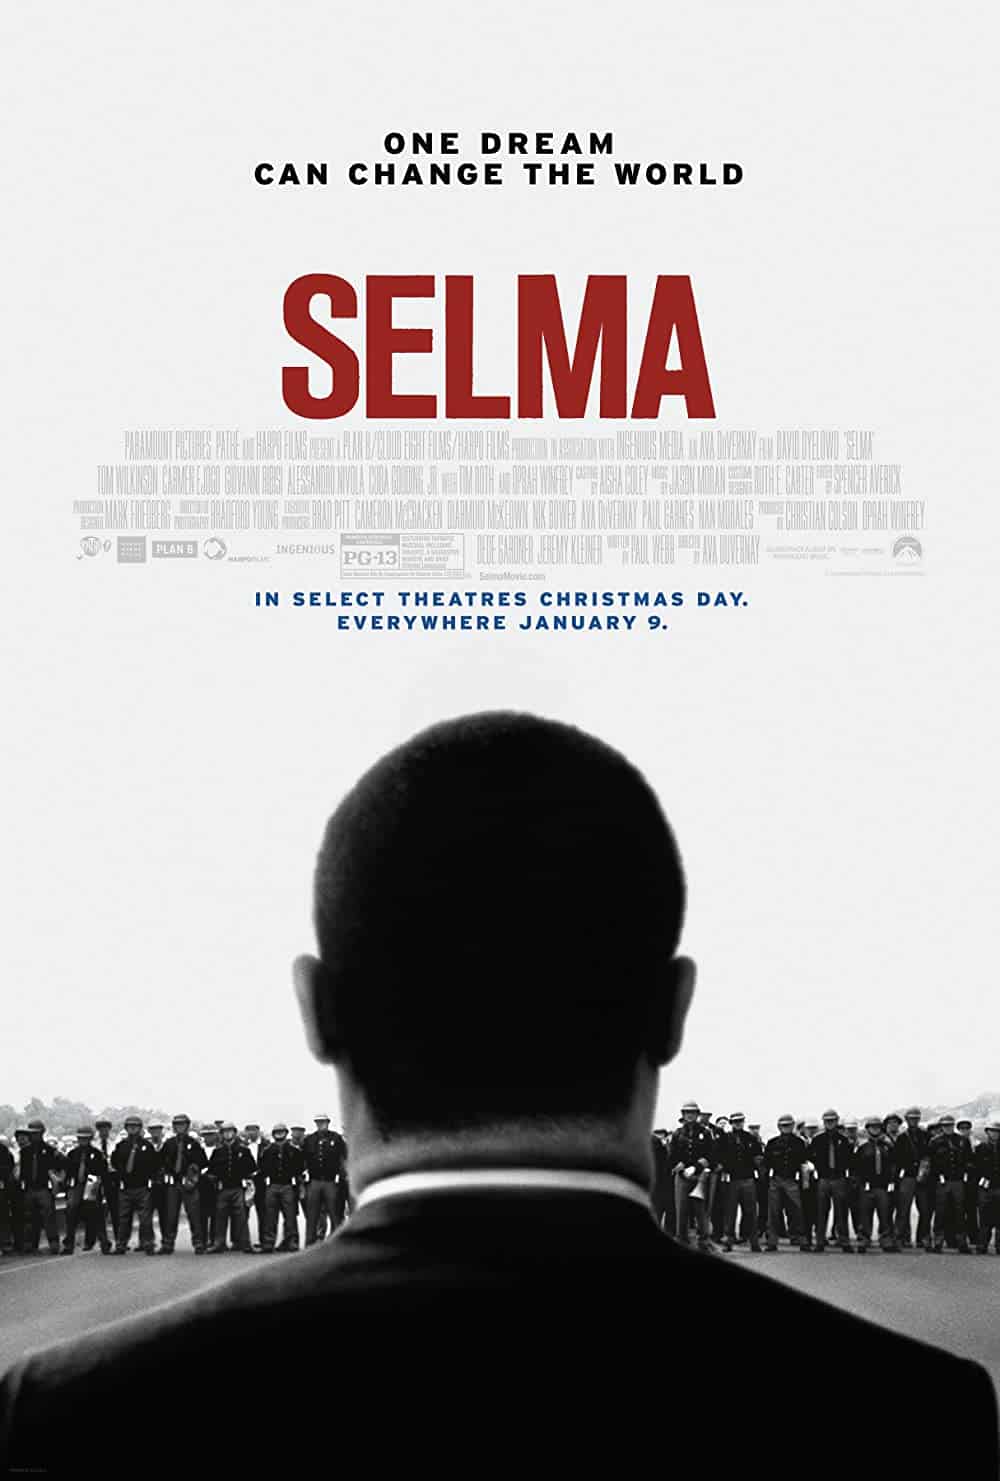 Selma (2014) Best Civil Rights Movies to Add in Your Watchlist